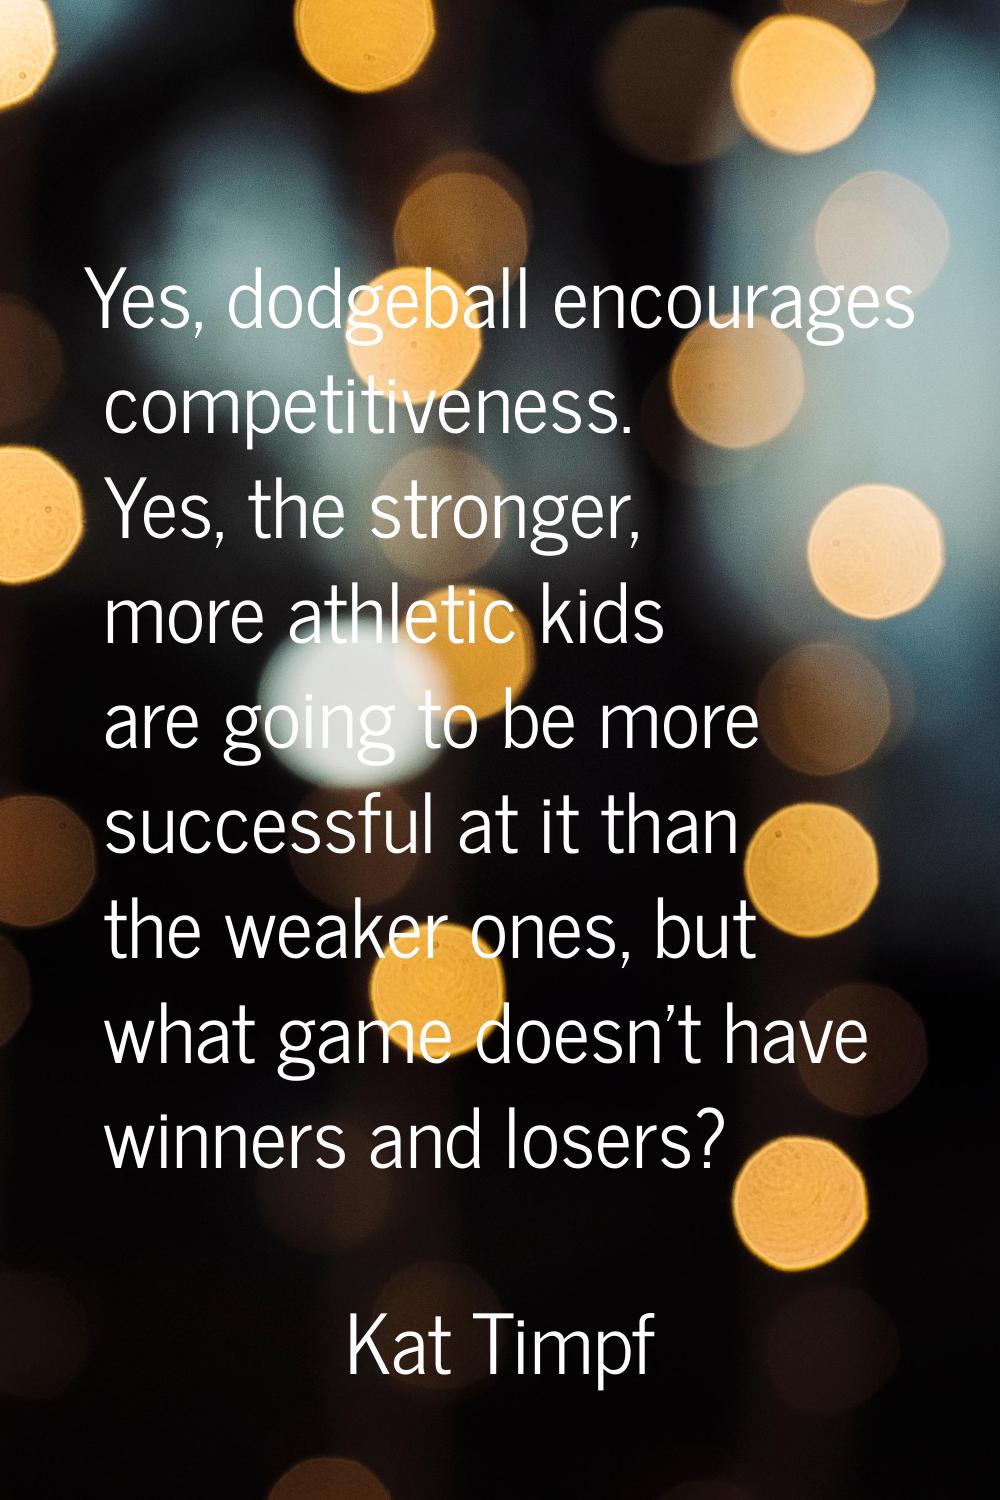 Yes, dodgeball encourages competitiveness. Yes, the stronger, more athletic kids are going to be mo